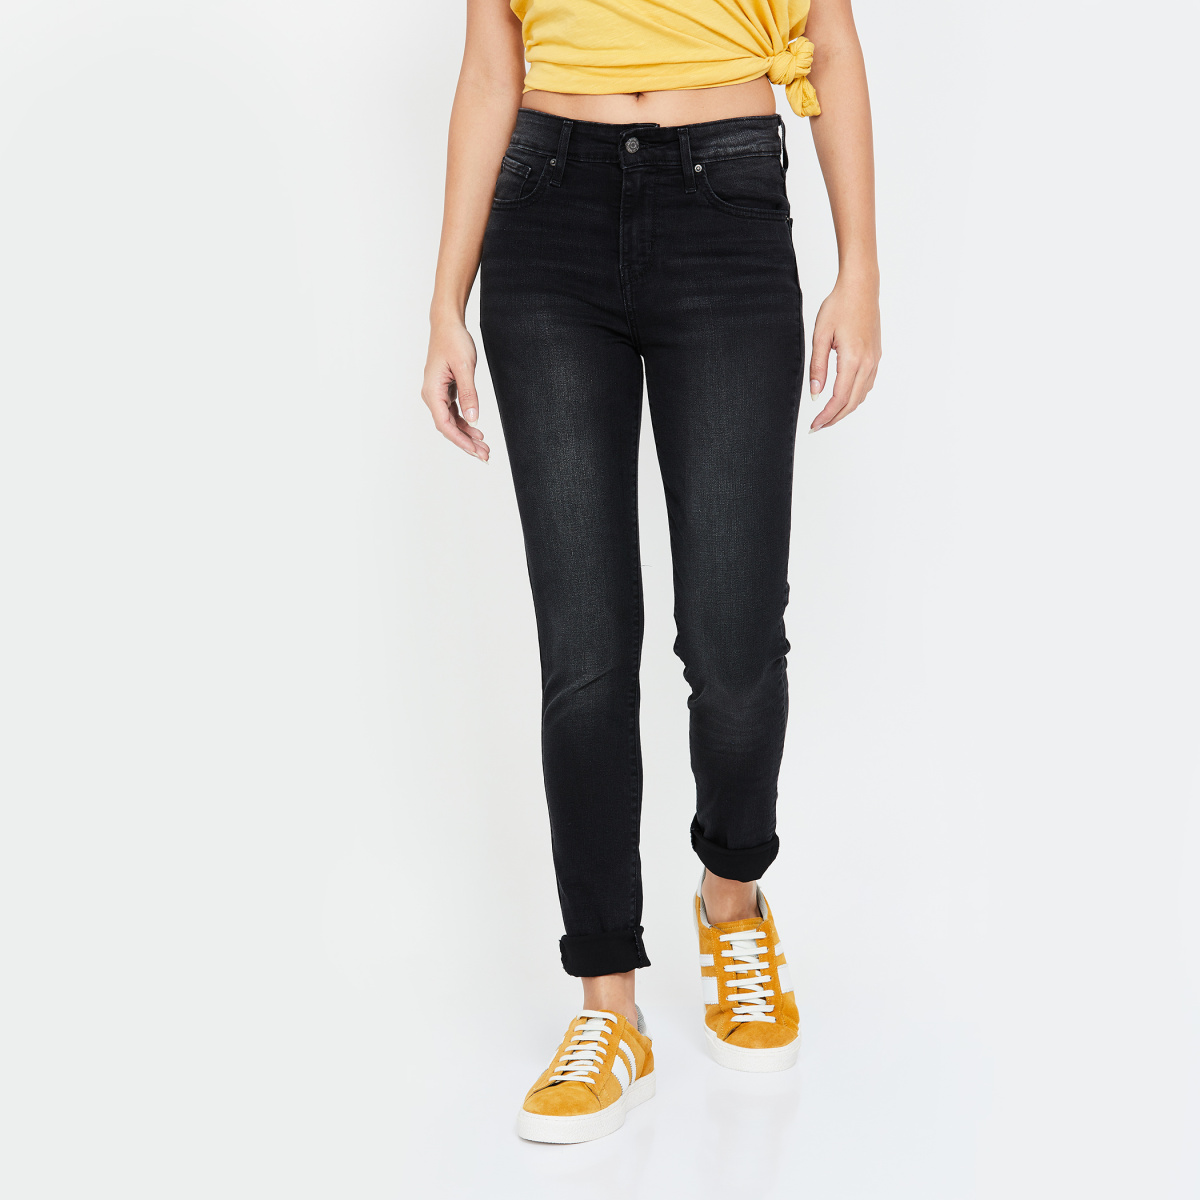 LEVI'S Dark Washed High-Rise Skinny Jeans